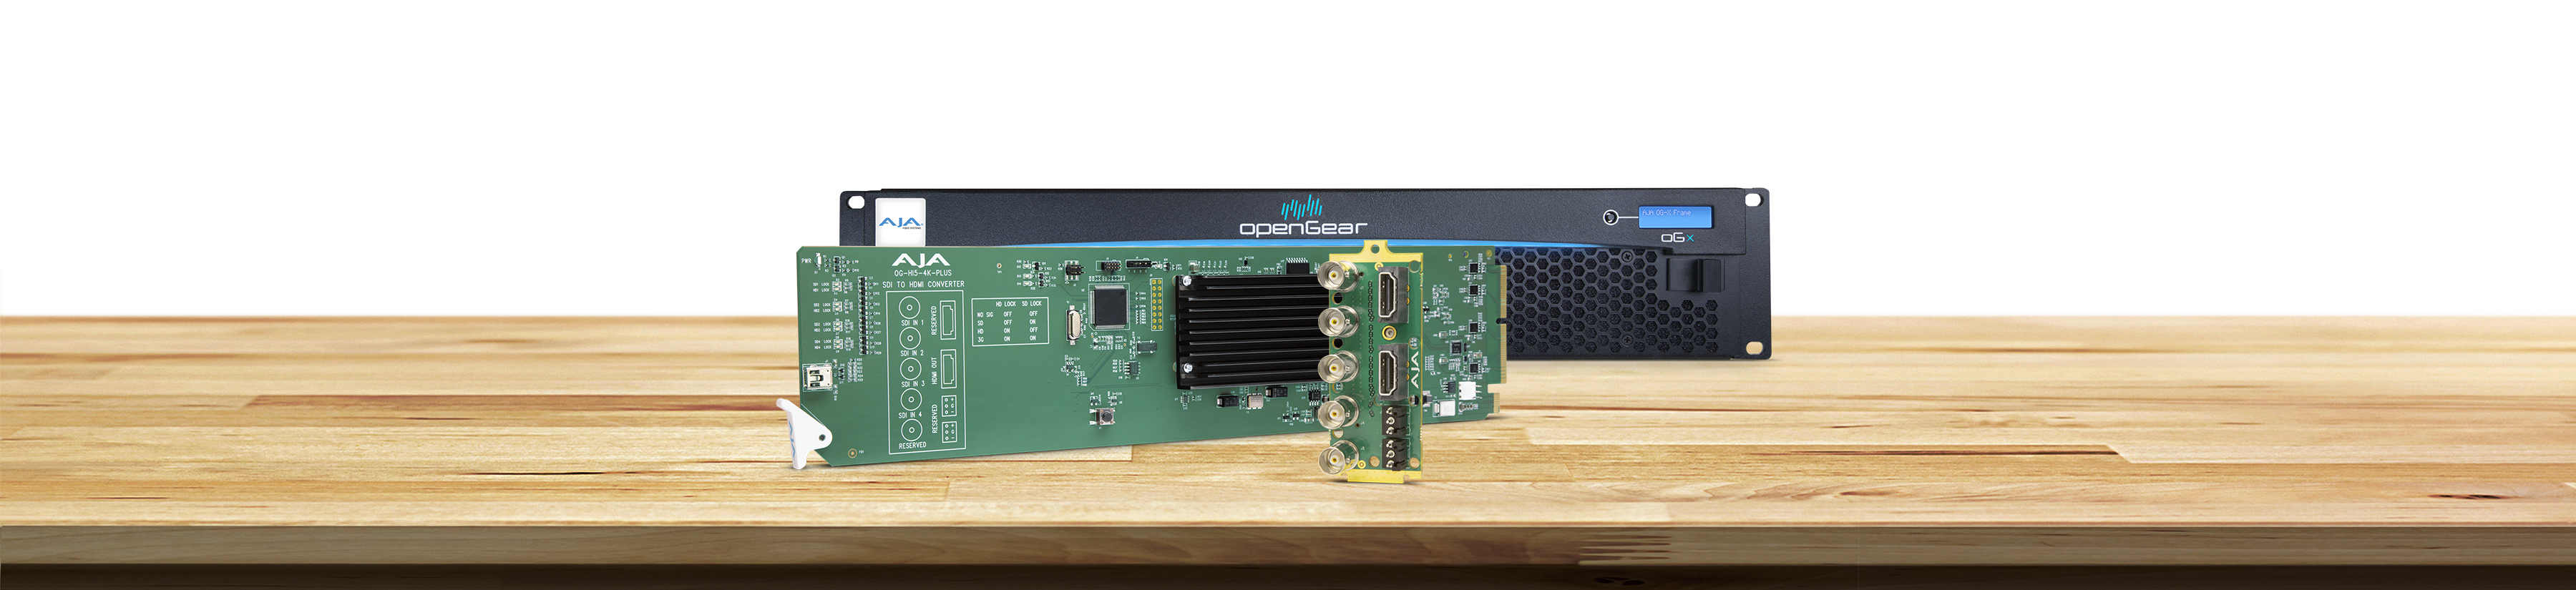 AJA Releases New Firmware for openGear Cards Featuring 12-bit Support for OG-Hi5-4K-Plus